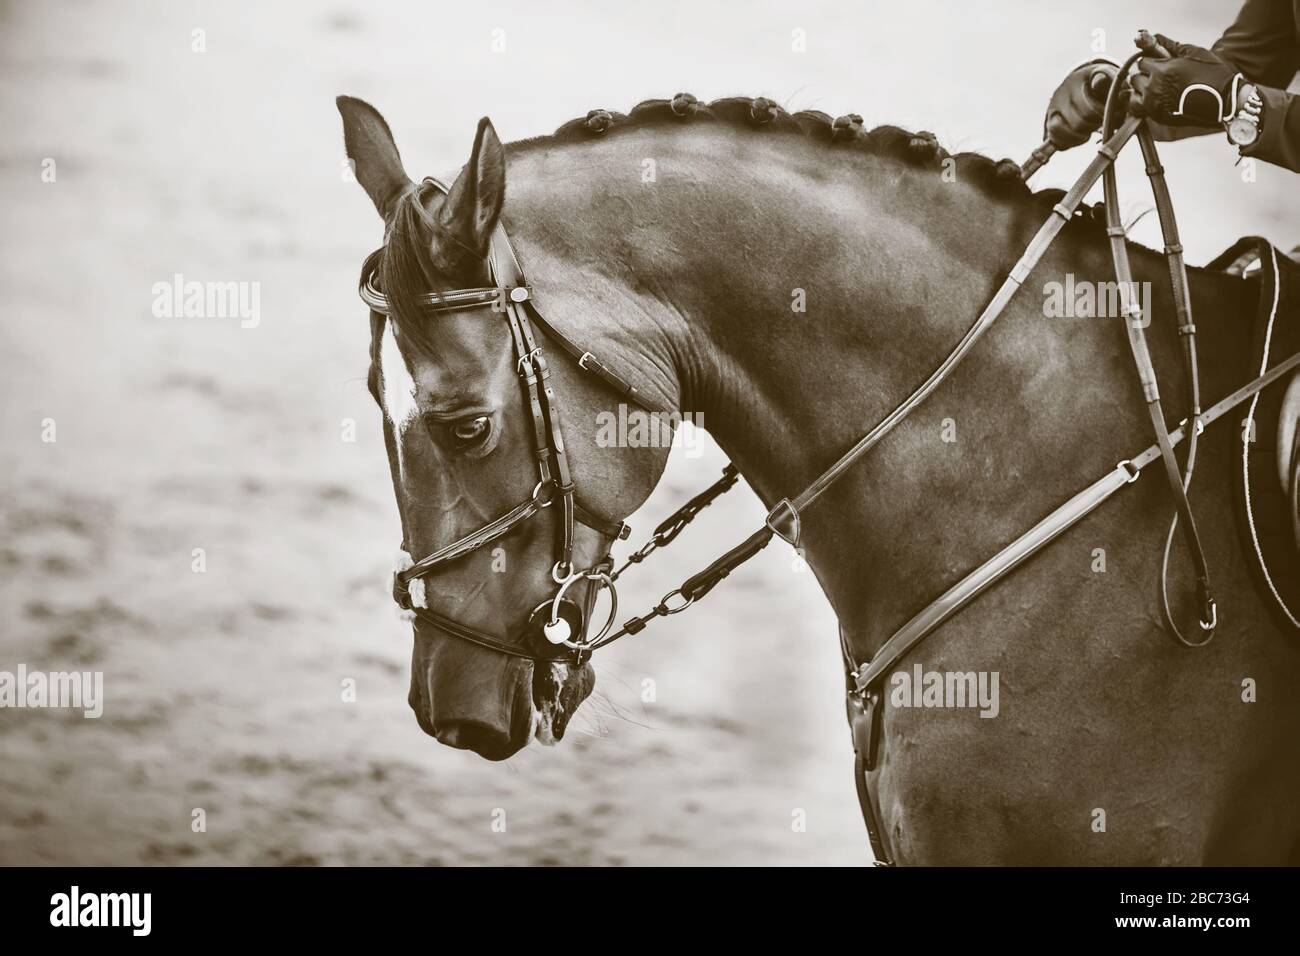 Monochrome image of a racehorse with a bridle on its muzzle, which is held by the reins by a rider in gloves. Stock Photo